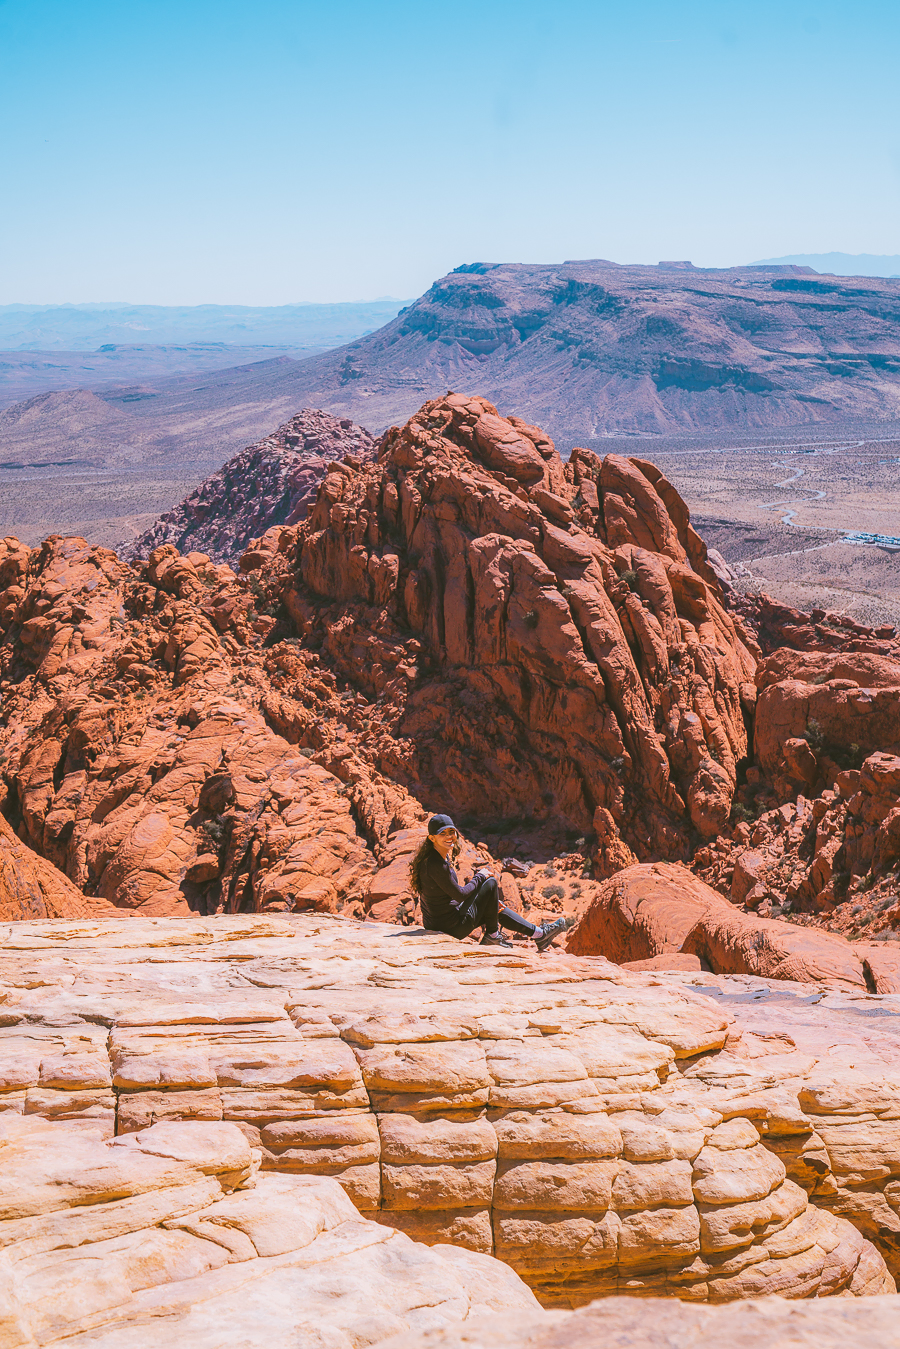 Best Hikes In Red Rock Canyon